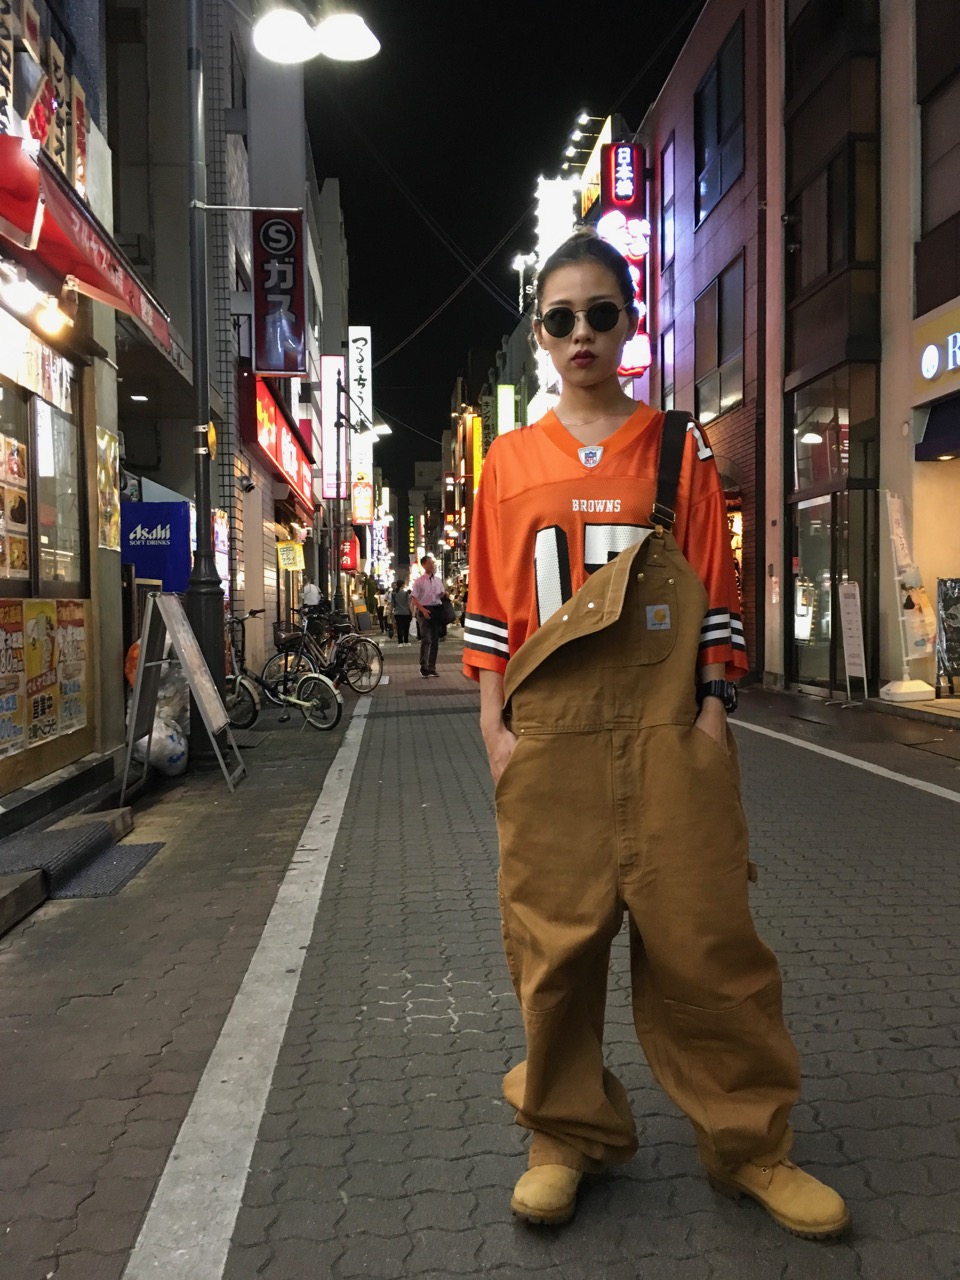 Carhartt browns style